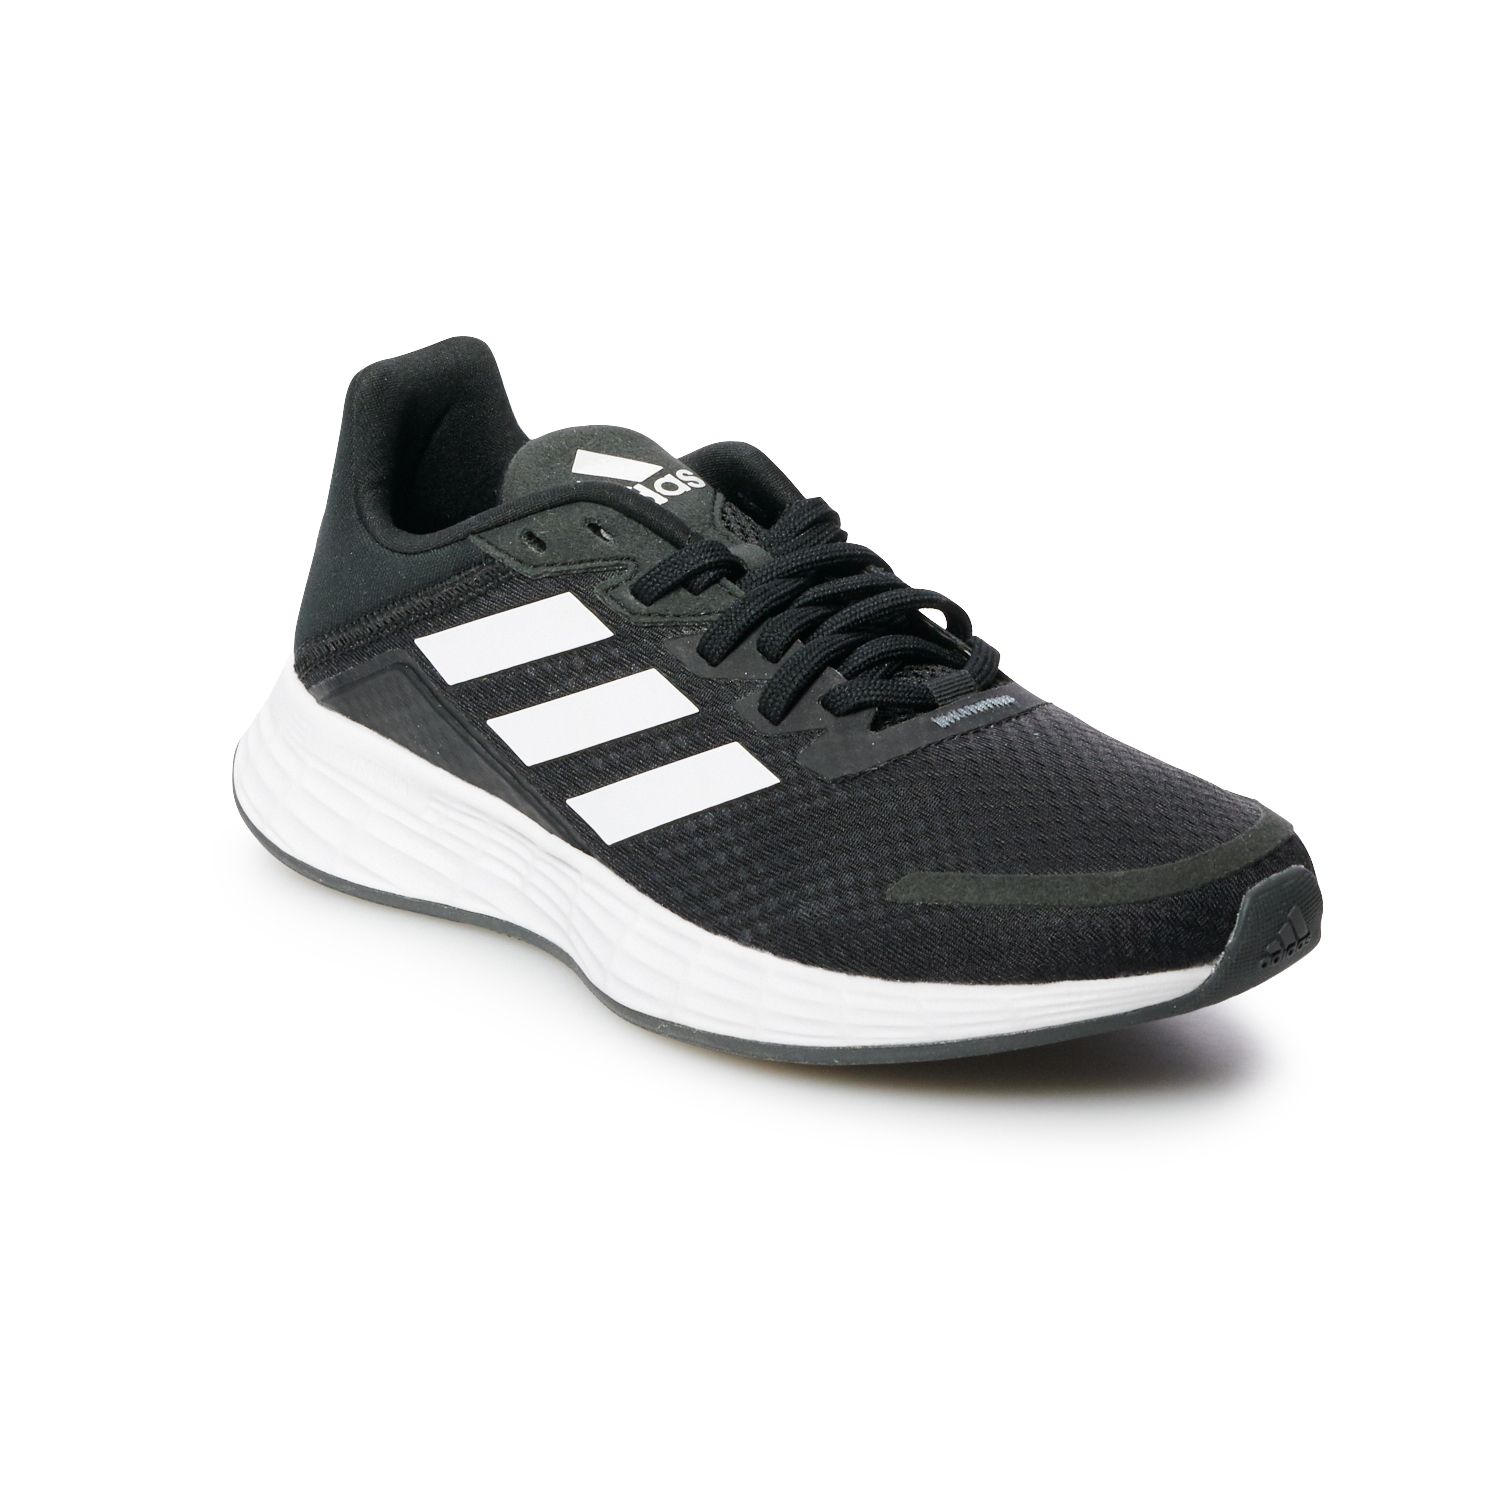 adidas shoes new model price